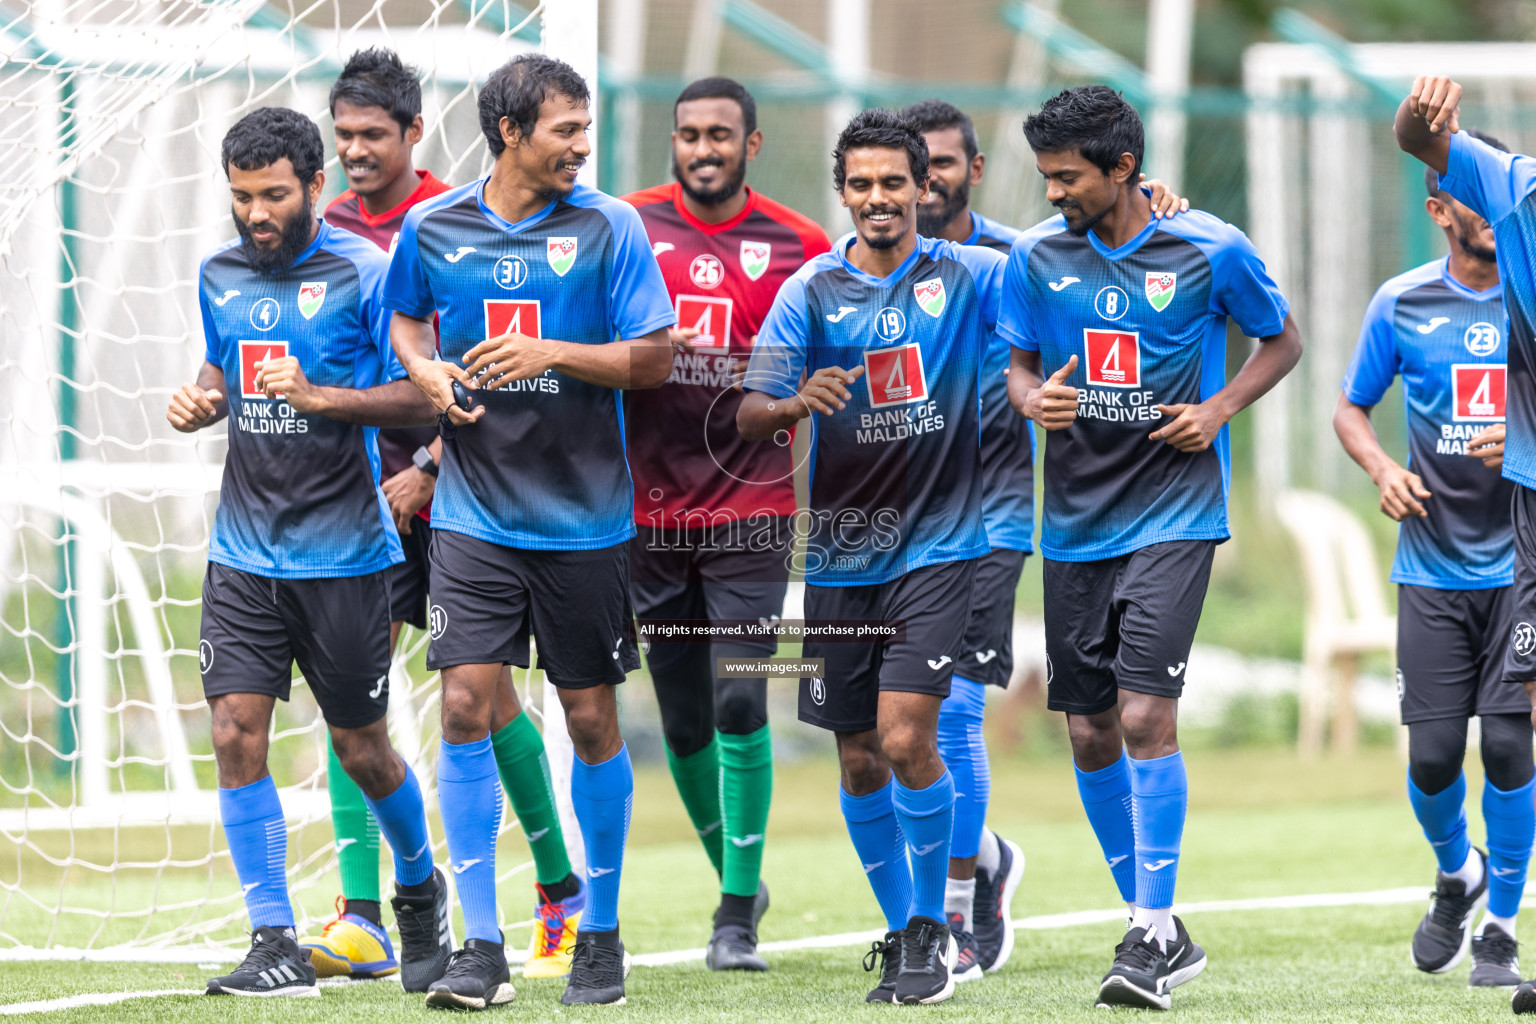 Maldives and Bangladesh Practice Sessions on 23 June 2023 before their match in Bangabandhu SAFF Championship 2023 held in Bengaluru Football Tournament